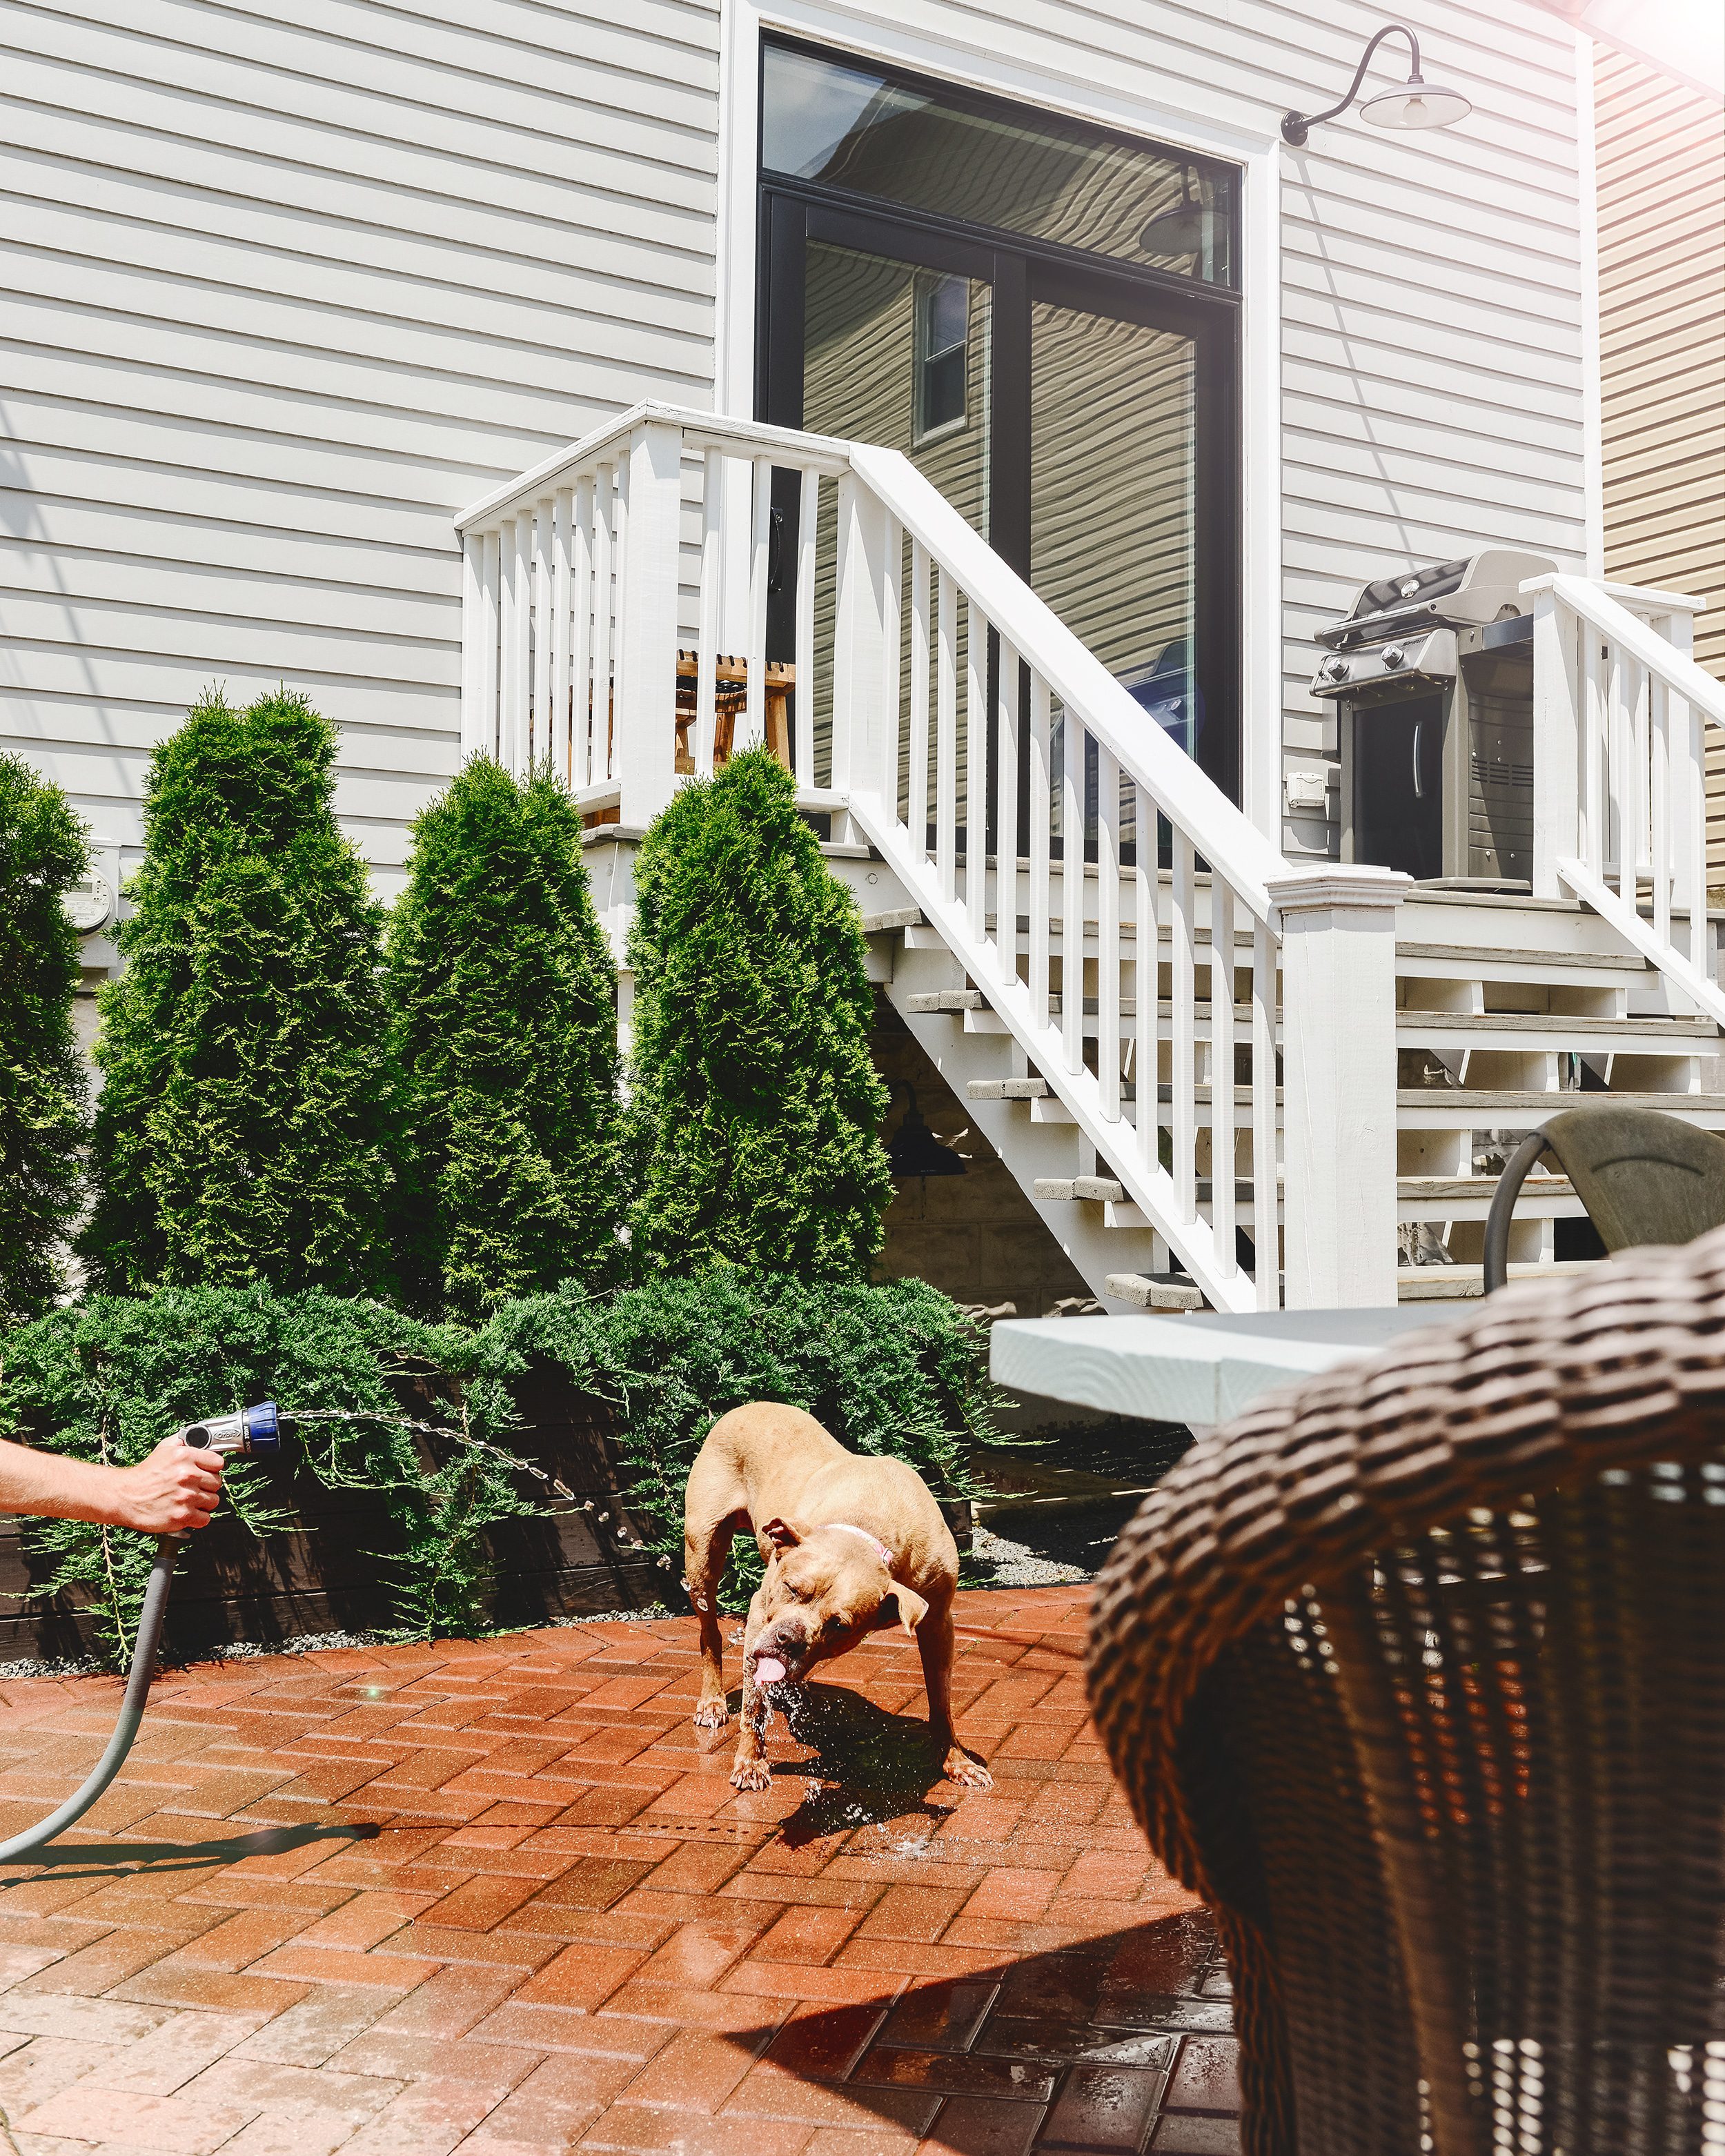 A brown pitbull mix drinks from a garden hose on a red brick patio with lush evergreens // via Yellow Brick Home